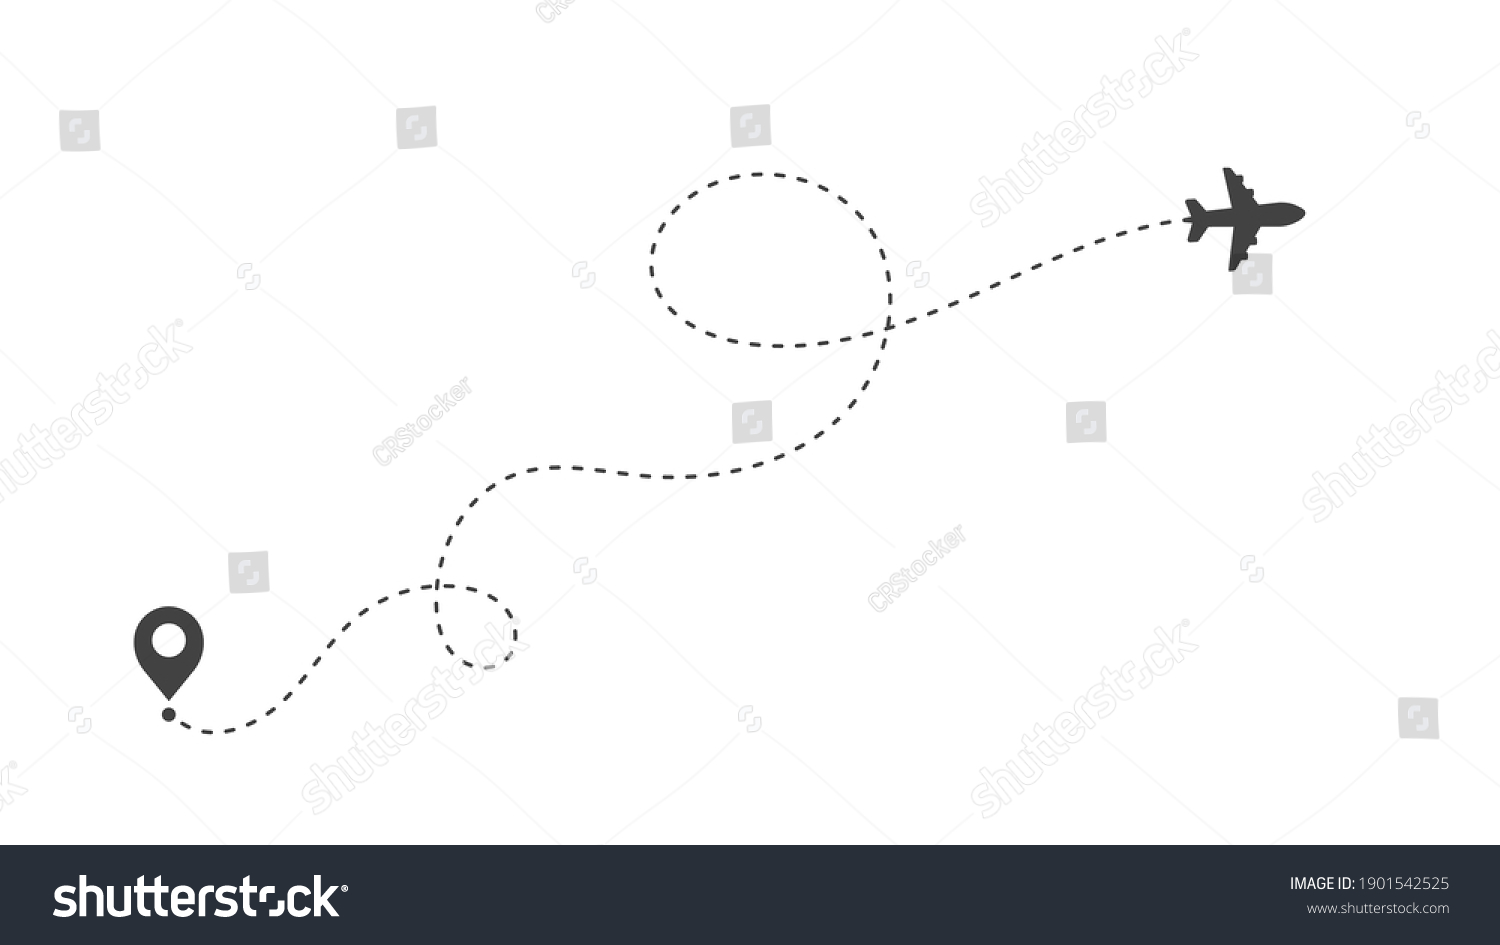 SVG of Airplane routes. Travel vector icon. Travel from start point and dotted line tracing. svg